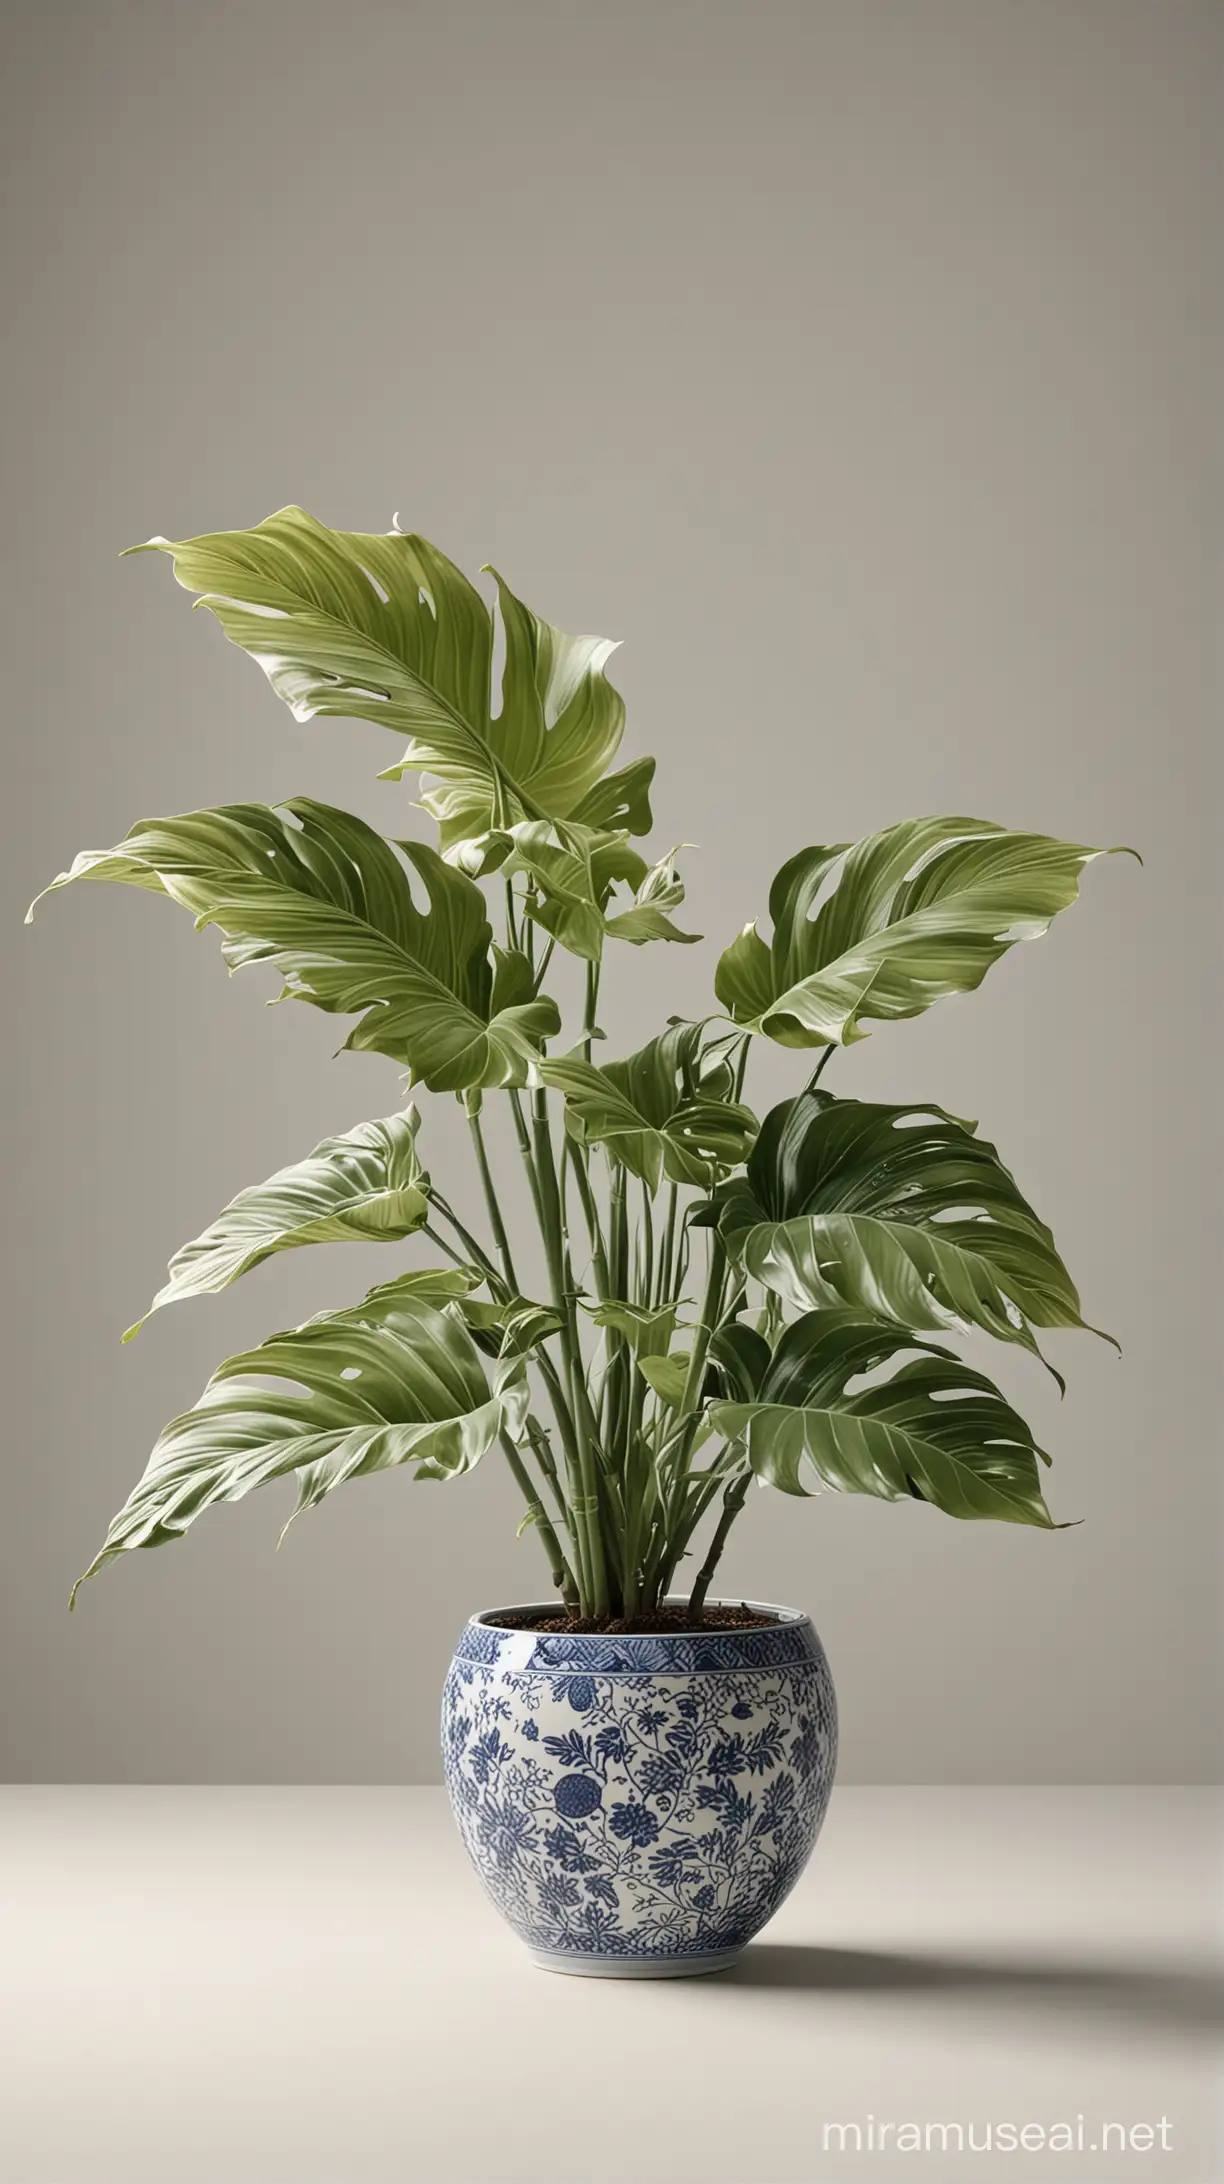 Object: A porcelain Philodendron Birkin, where each leaf is meticulously crafted to resemble a work of art, capturing the essence of light, texture, and symmetry.
Environment: Set within a serene Studio Bonsai garden.
Background: Against a minimalist Studio Wall backdrop.
Photography Type: Fashion Editorial, accentuating the porcelain plant's exquisite leaf details.
Theme: Inspired by Japanese Porcelain Arita and Imari artistry.
Visual Filters: Cinematic Fashion filters for enhanced allure.
Camera Effects: Subtle haze, warm Film LUT, and gentle blur.
Resolution: High-resolution imagery for pristine detail.
Key Element: The porcelain plant's intricately sculpted leaves stand as a testament to fine artistry.
Details: Each porcelain leaf exhibits the delicate craftsmanship, with glossy finishes and intricate vein patterns reminiscent of traditional porcelain art.